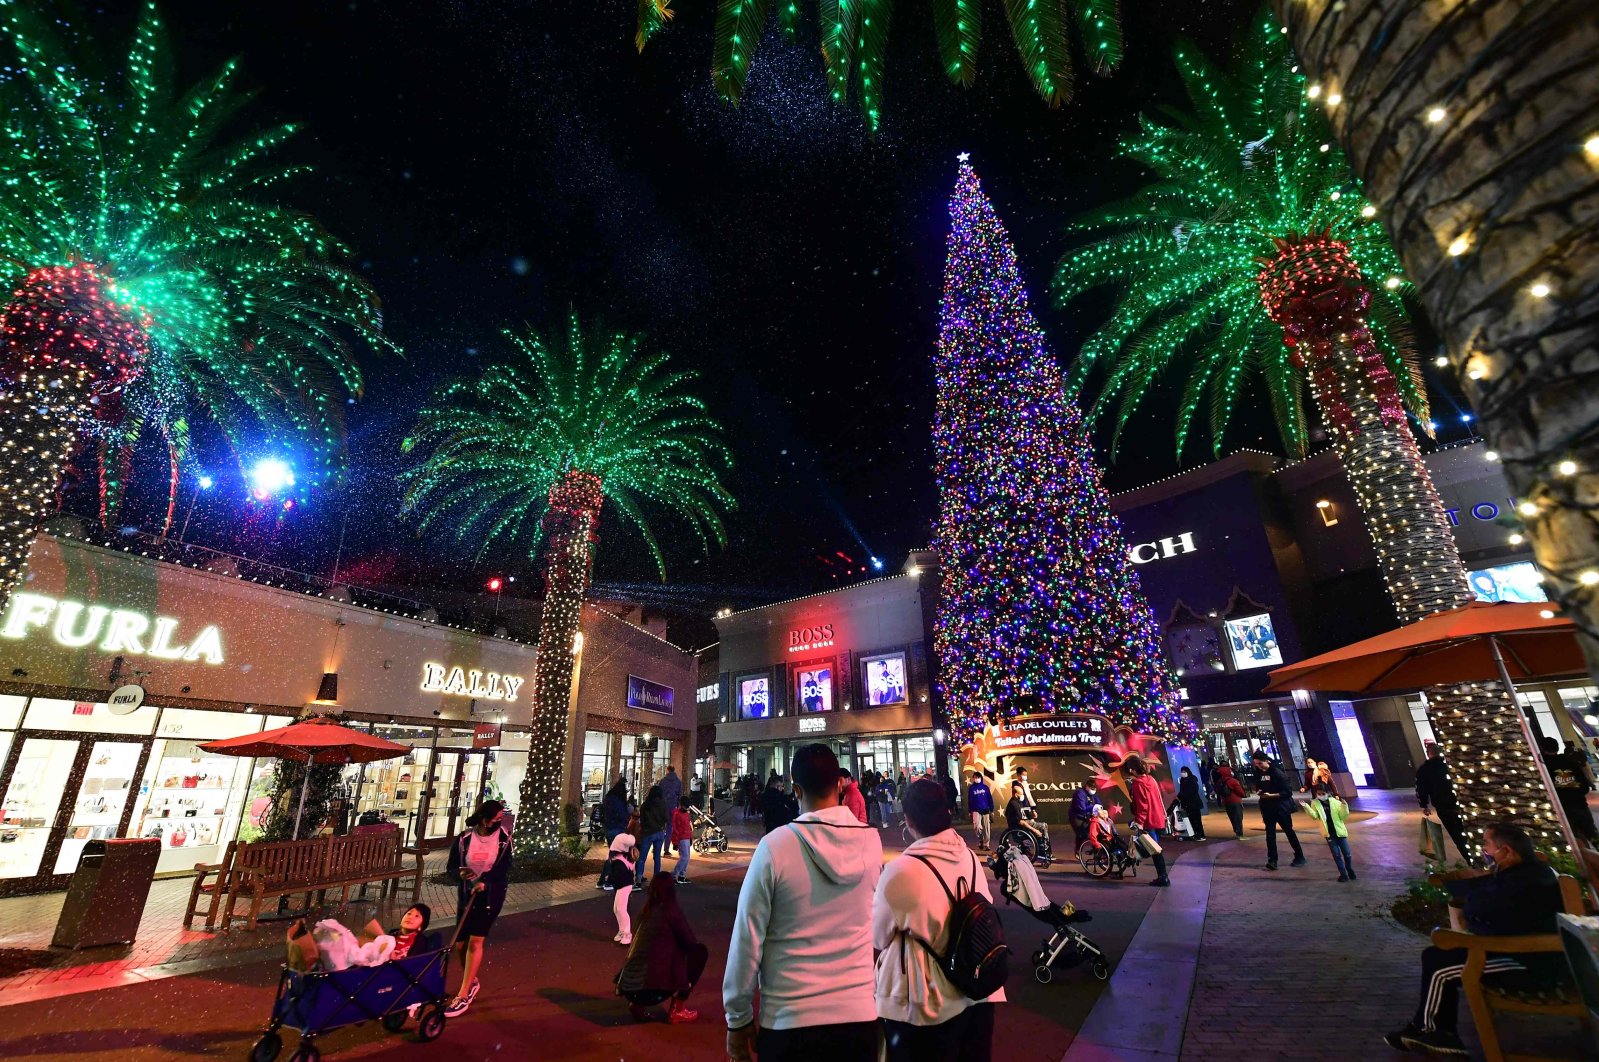 As people shop ahead of the holidays, a 115-foot Christmas tree lights up the Citadel Outlets in Los Angeles, California, U.S., Dec. 9, 2021. (AFP Photo)